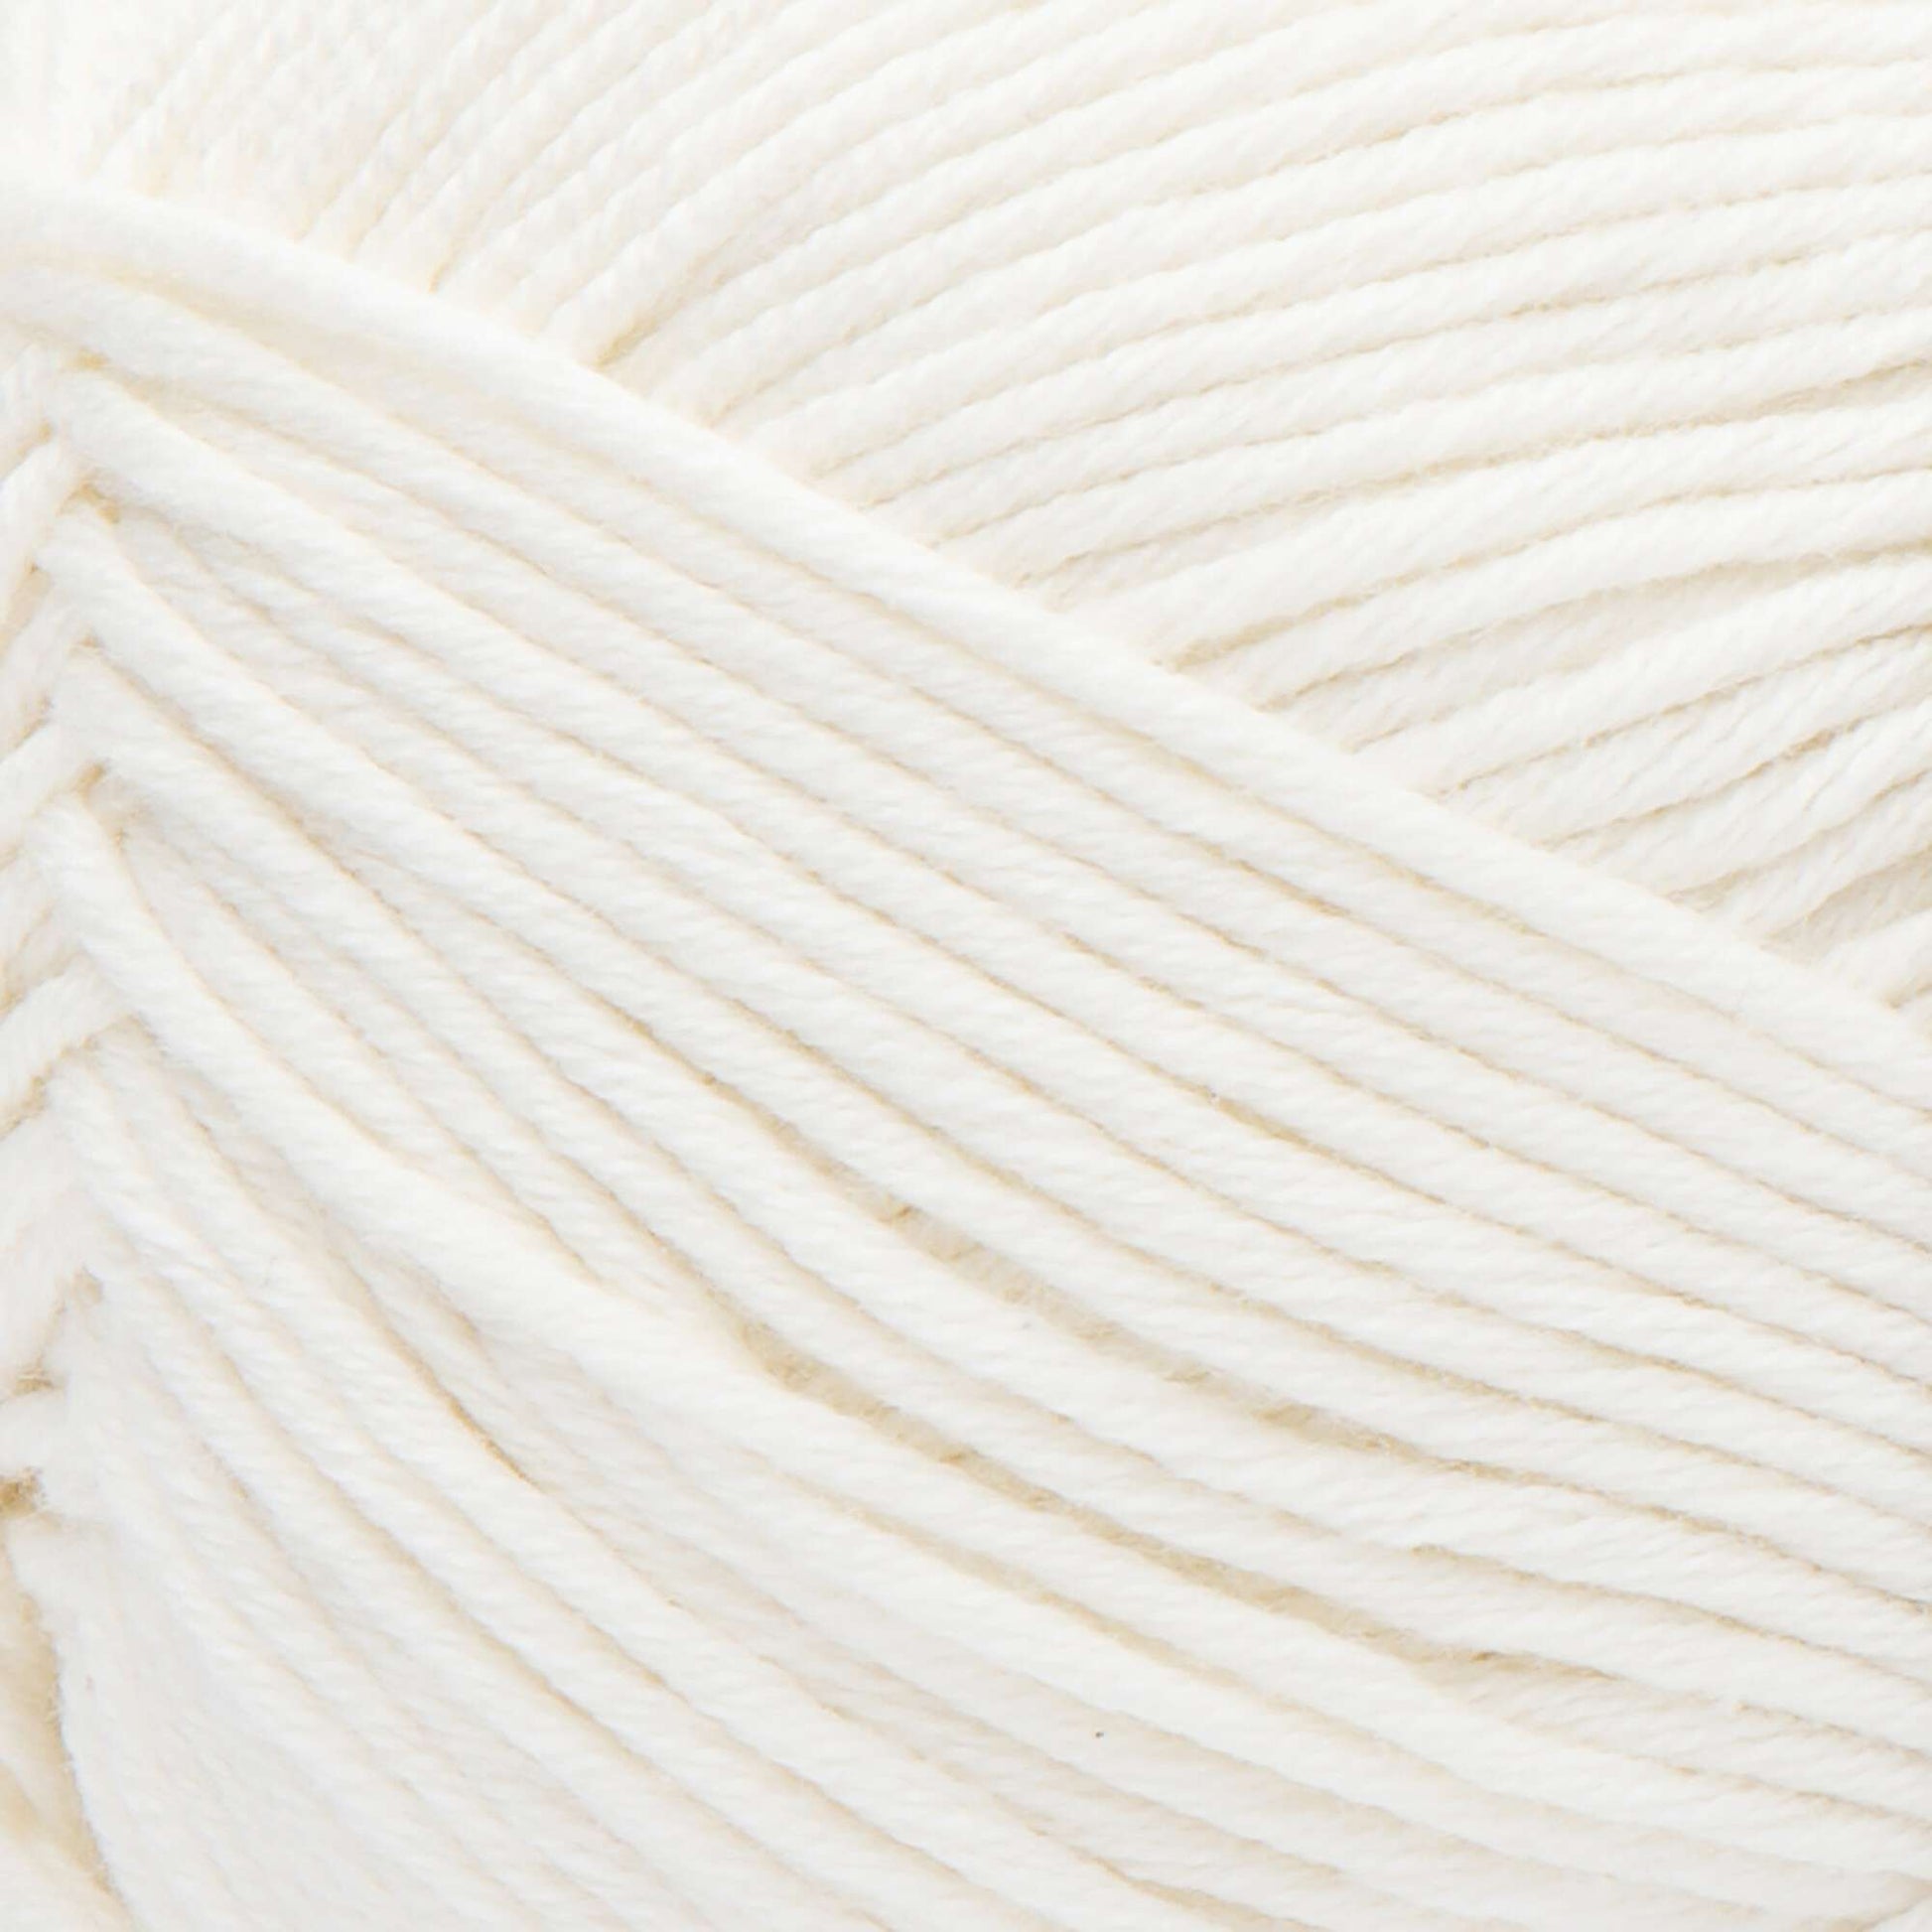 Background Texture Elegant White Embroidery Floss, Wool, Yarn